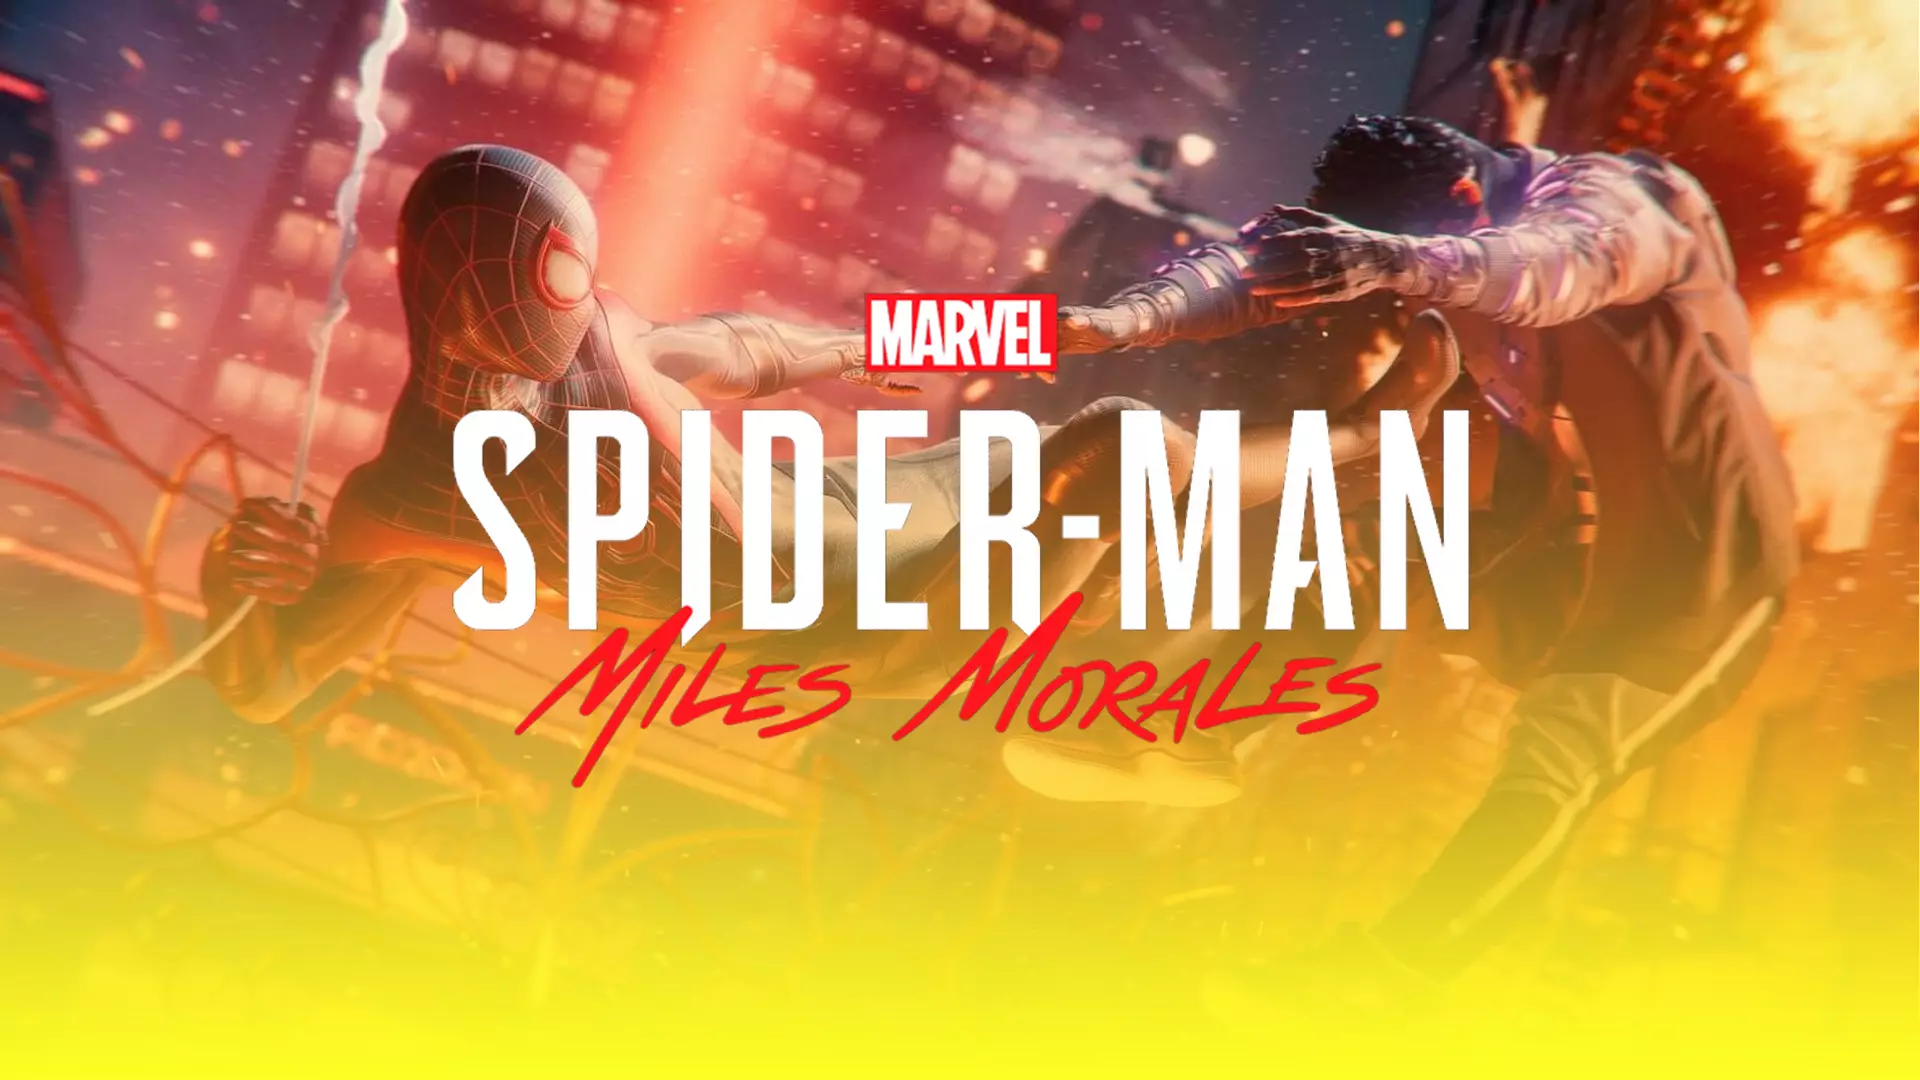 Marvel's Spider-Man Miles Morales PC release date revealed